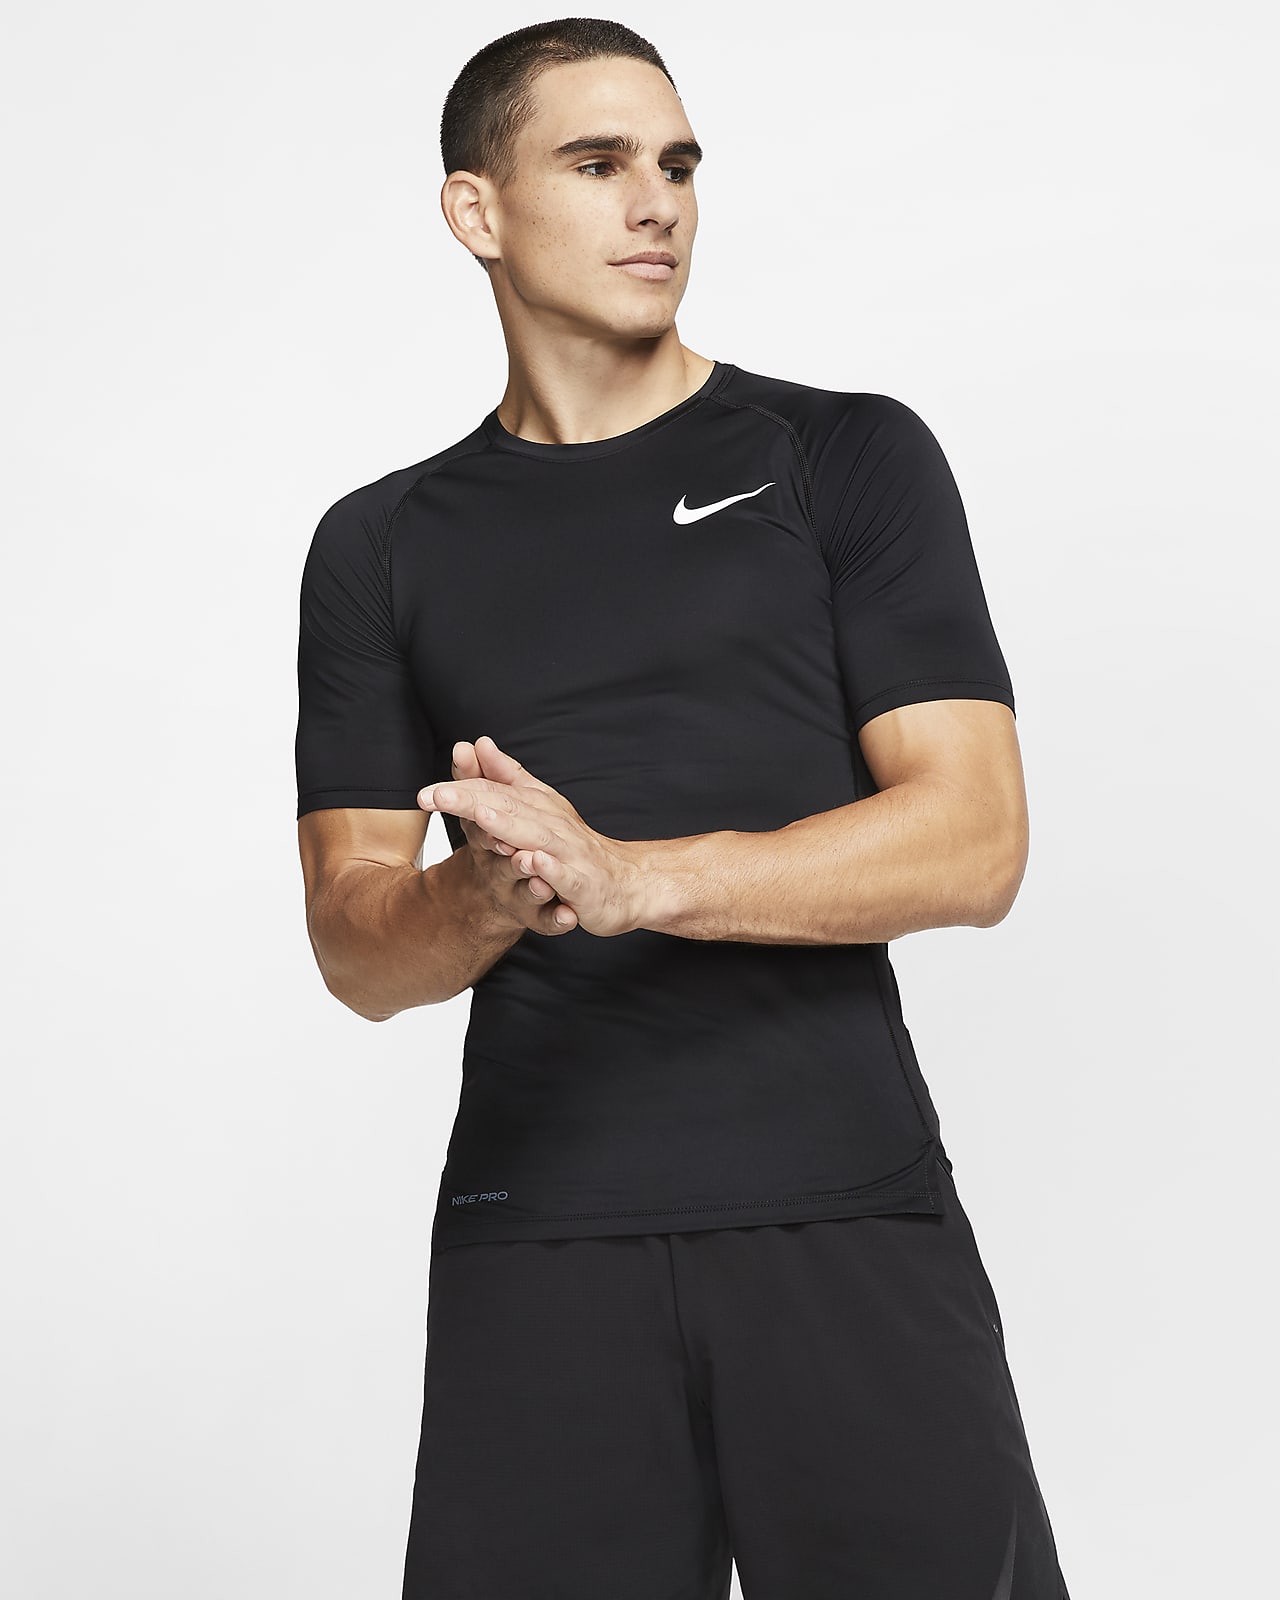 Tight-Fit Short-Sleeve Top. Nike AU